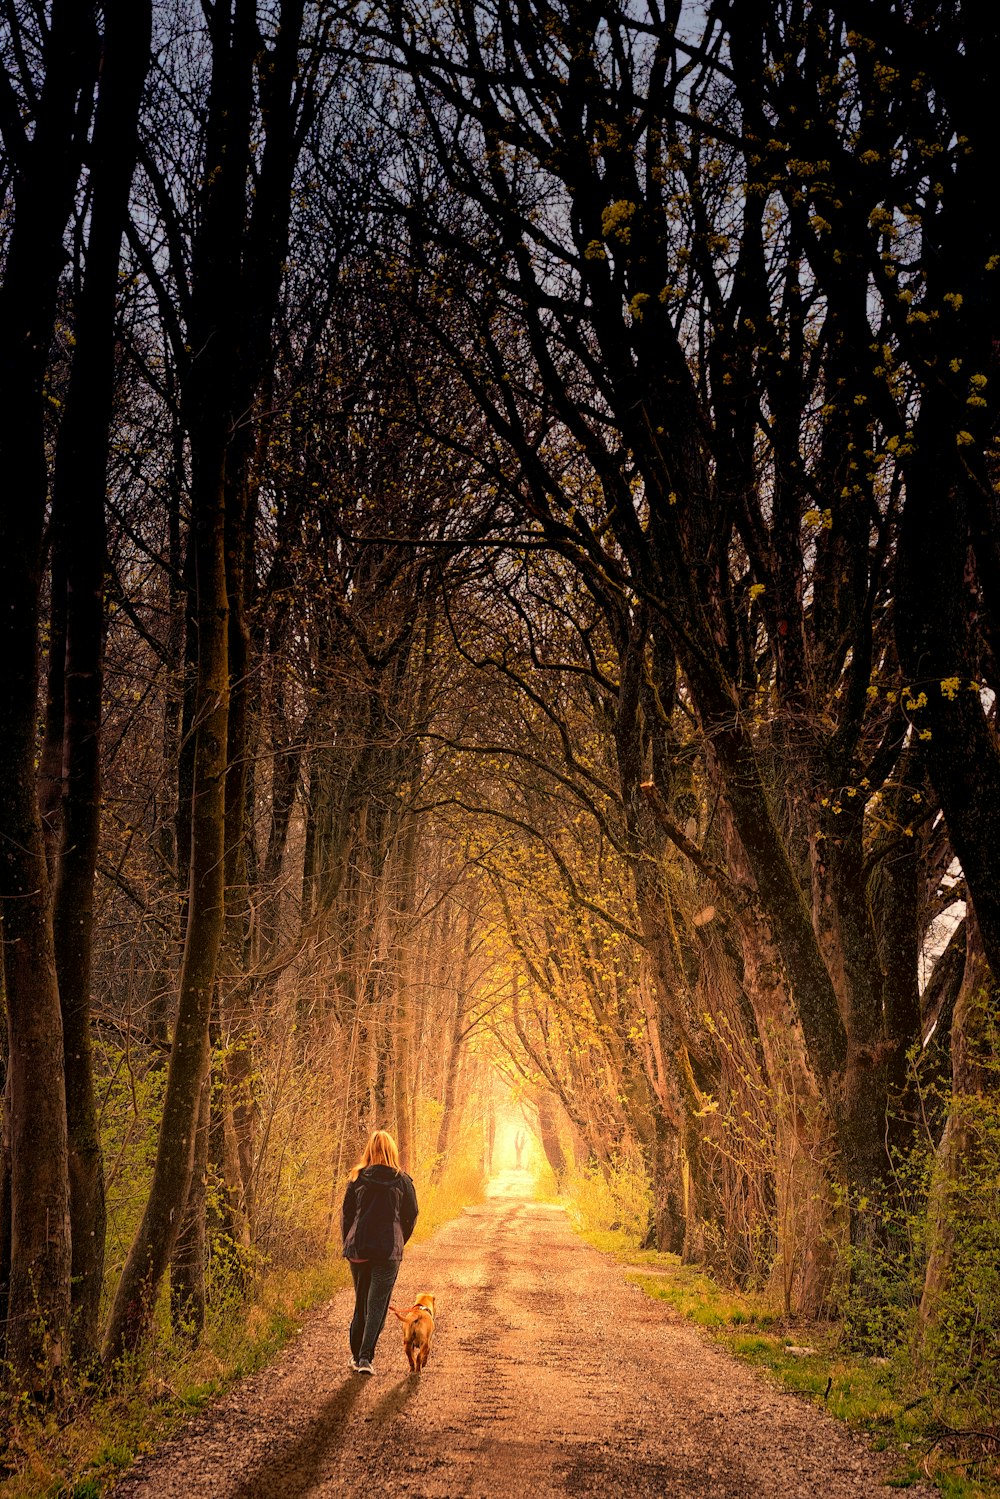 person walking in pathway near trees during daytime